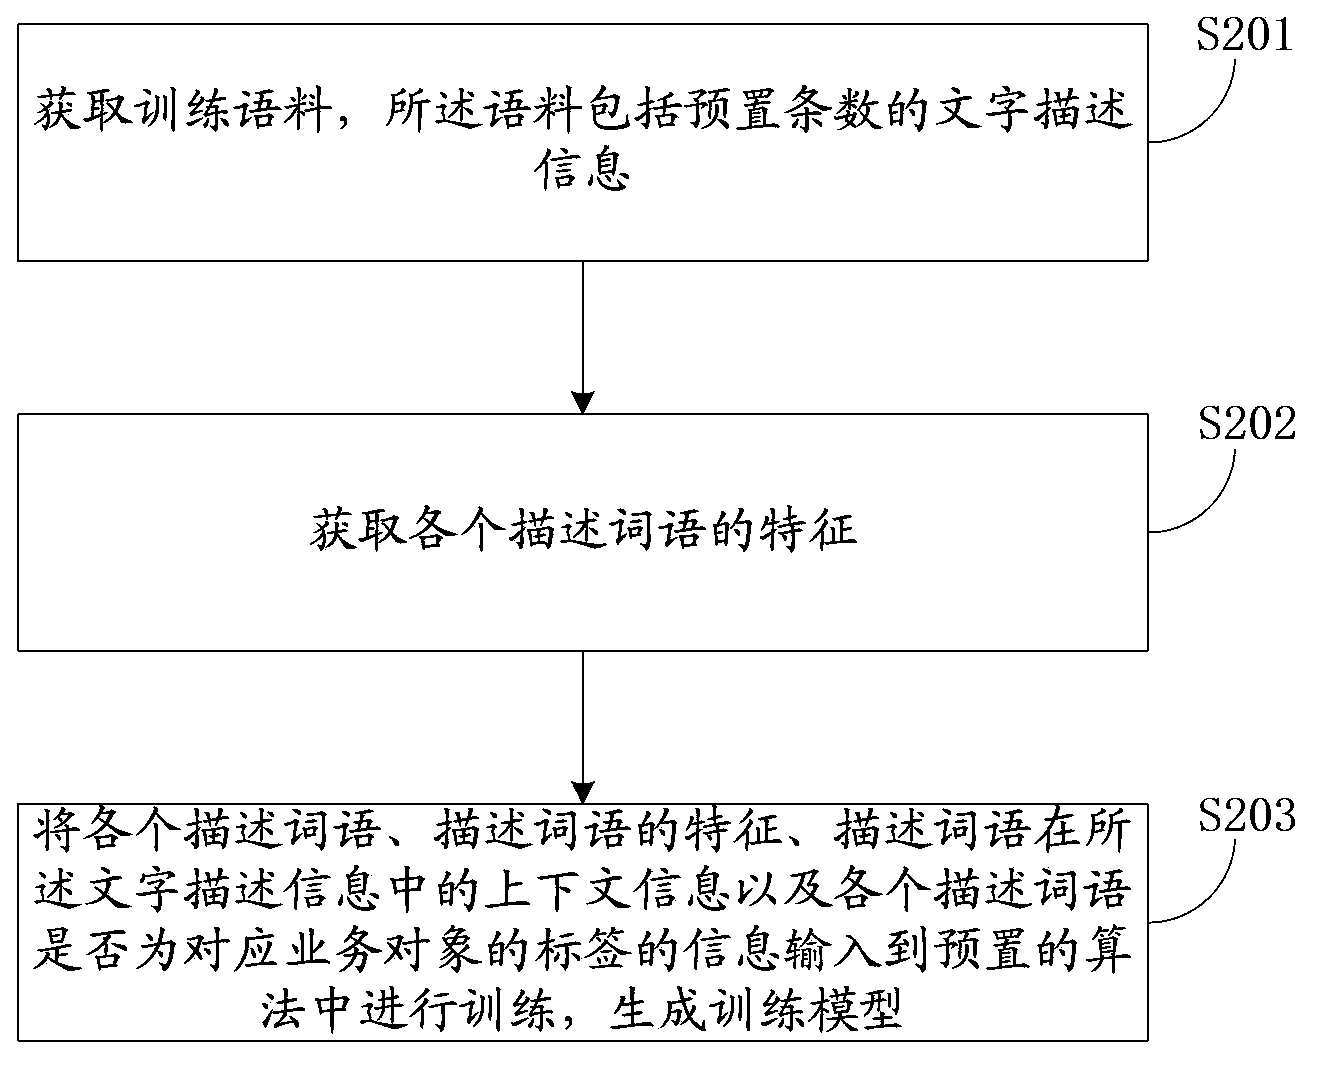 Method and device for acquiring business object label and building training model